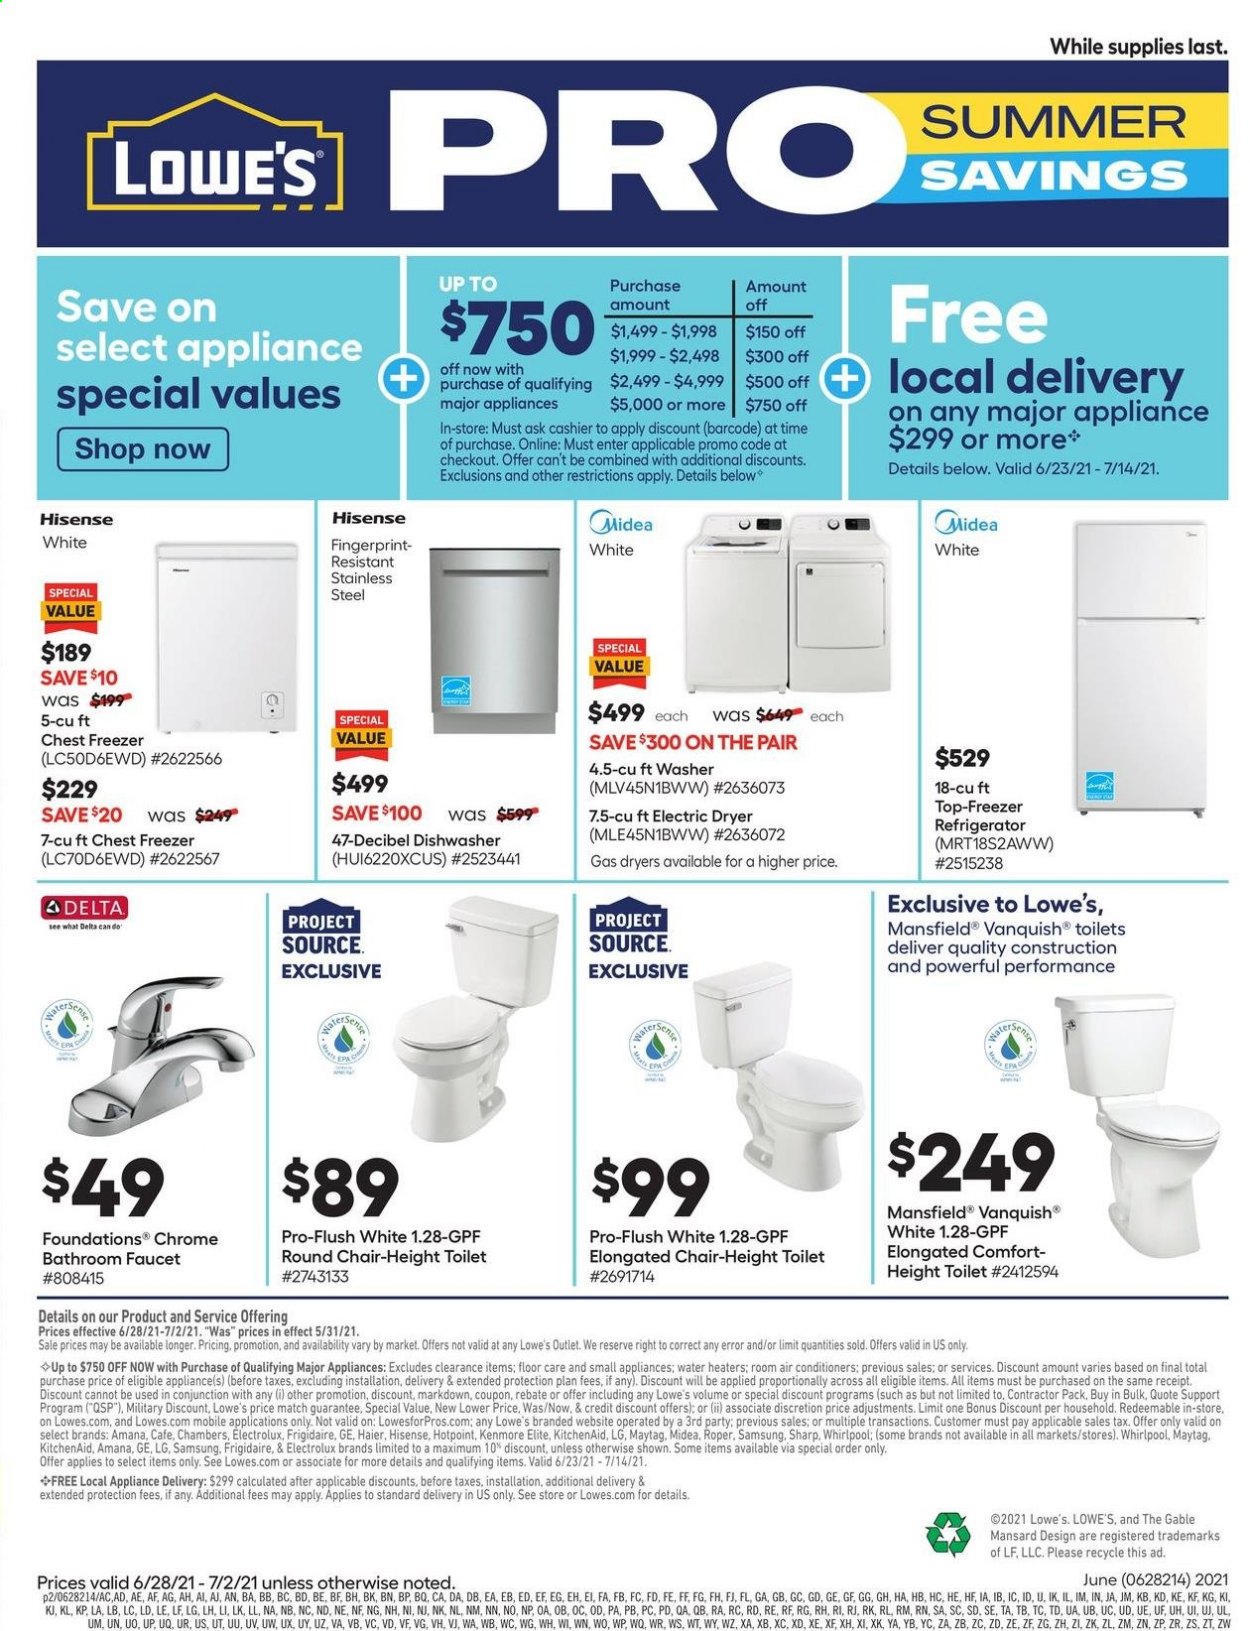 thumbnail - Lowe's Flyer - 06/28/2021 - 07/02/2021 - Sales products - toilet, faucet, KitchenAid, Sharp, Samsung, Electrolux, Midea, Amana, Whirlpool, freezer, refrigerator, Haier, Hotpoint, chest freezer, Hisense, dishwasher, Maytag, washing machine, electric dryer, air conditioner, car battery. Page 2.